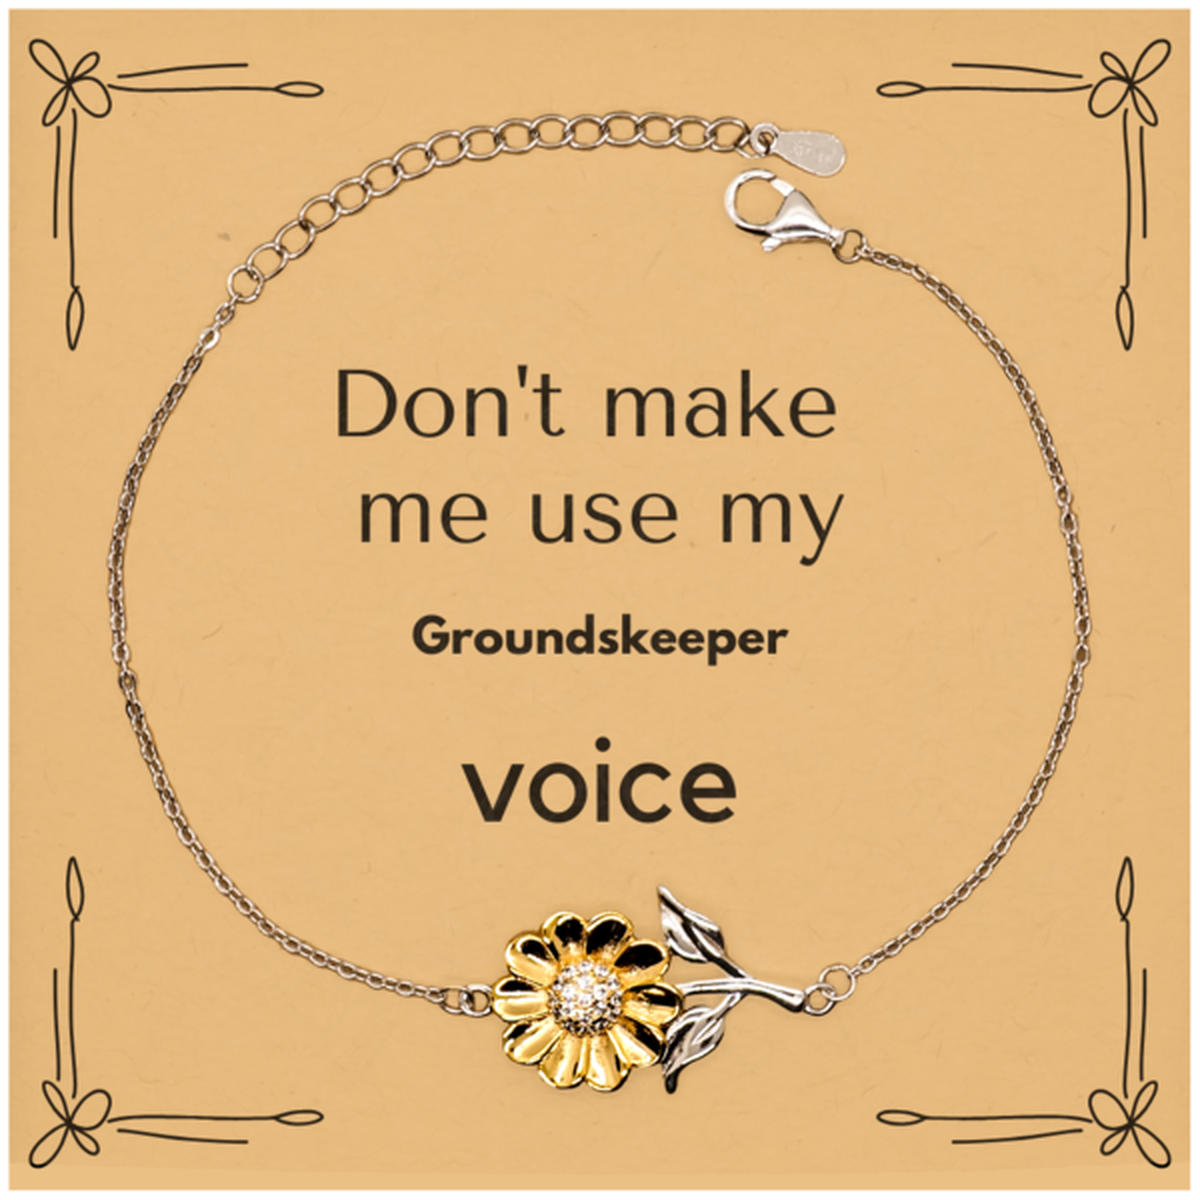 Don't make me use my Groundskeeper voice, Sarcasm Groundskeeper Card Gifts, Christmas Groundskeeper Sunflower Bracelet Birthday Unique Gifts For Groundskeeper Coworkers, Men, Women, Colleague, Friends